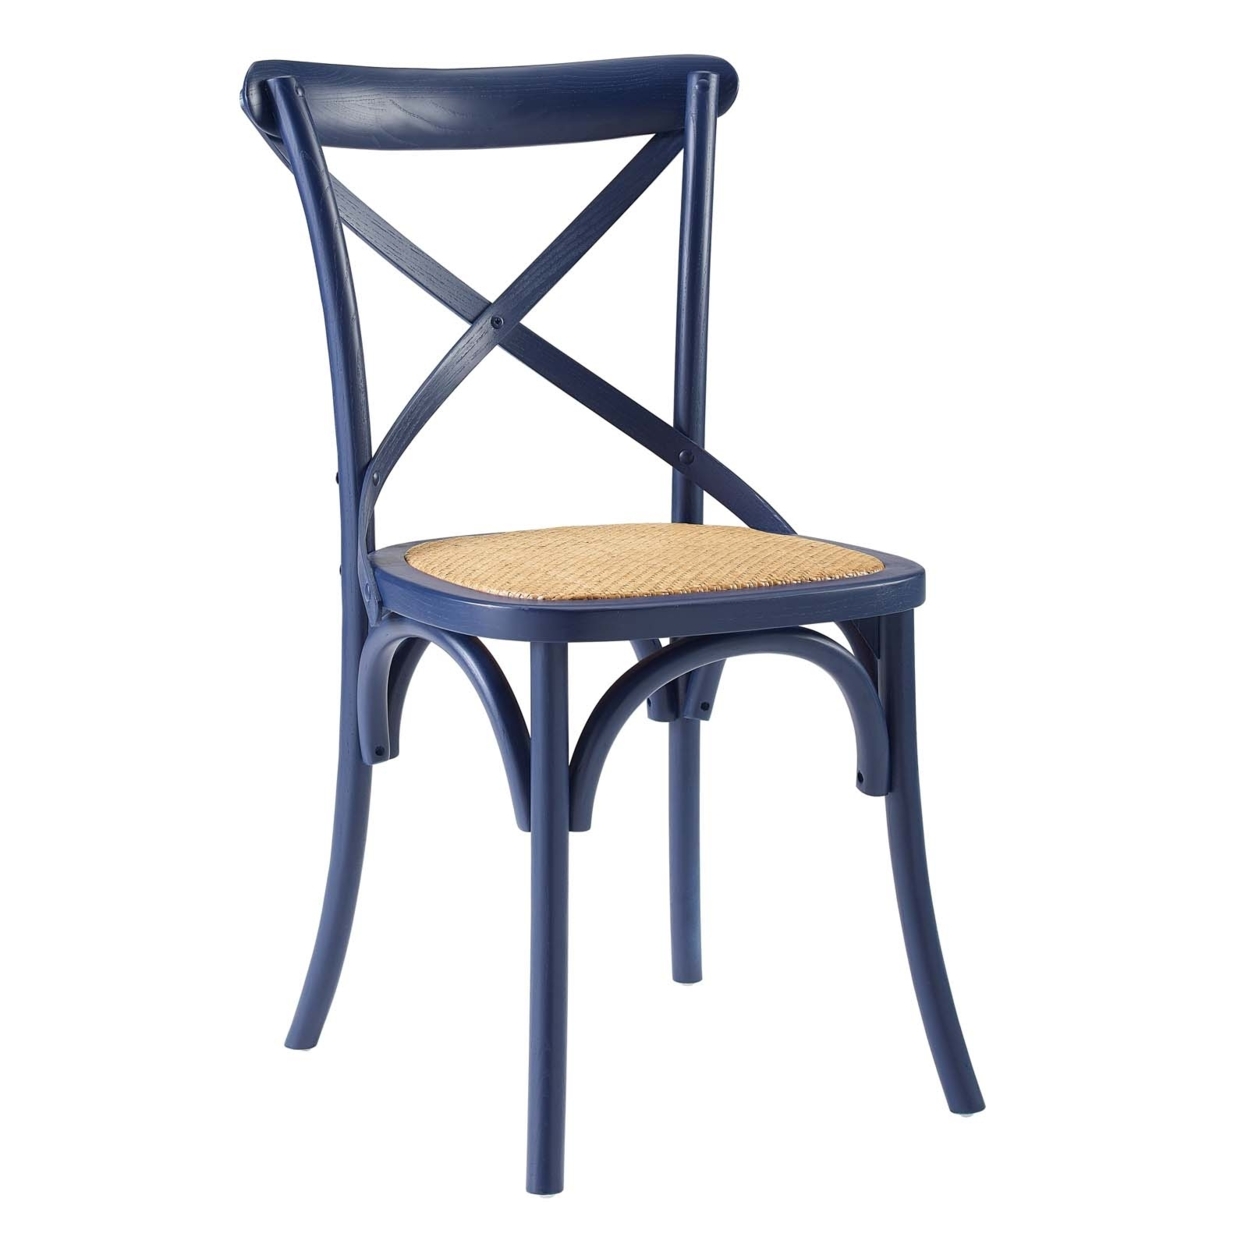 Wooden Farmhouse Dining Side Chair With X Back And Woven Seat, Blue, Saltoro Sherpi